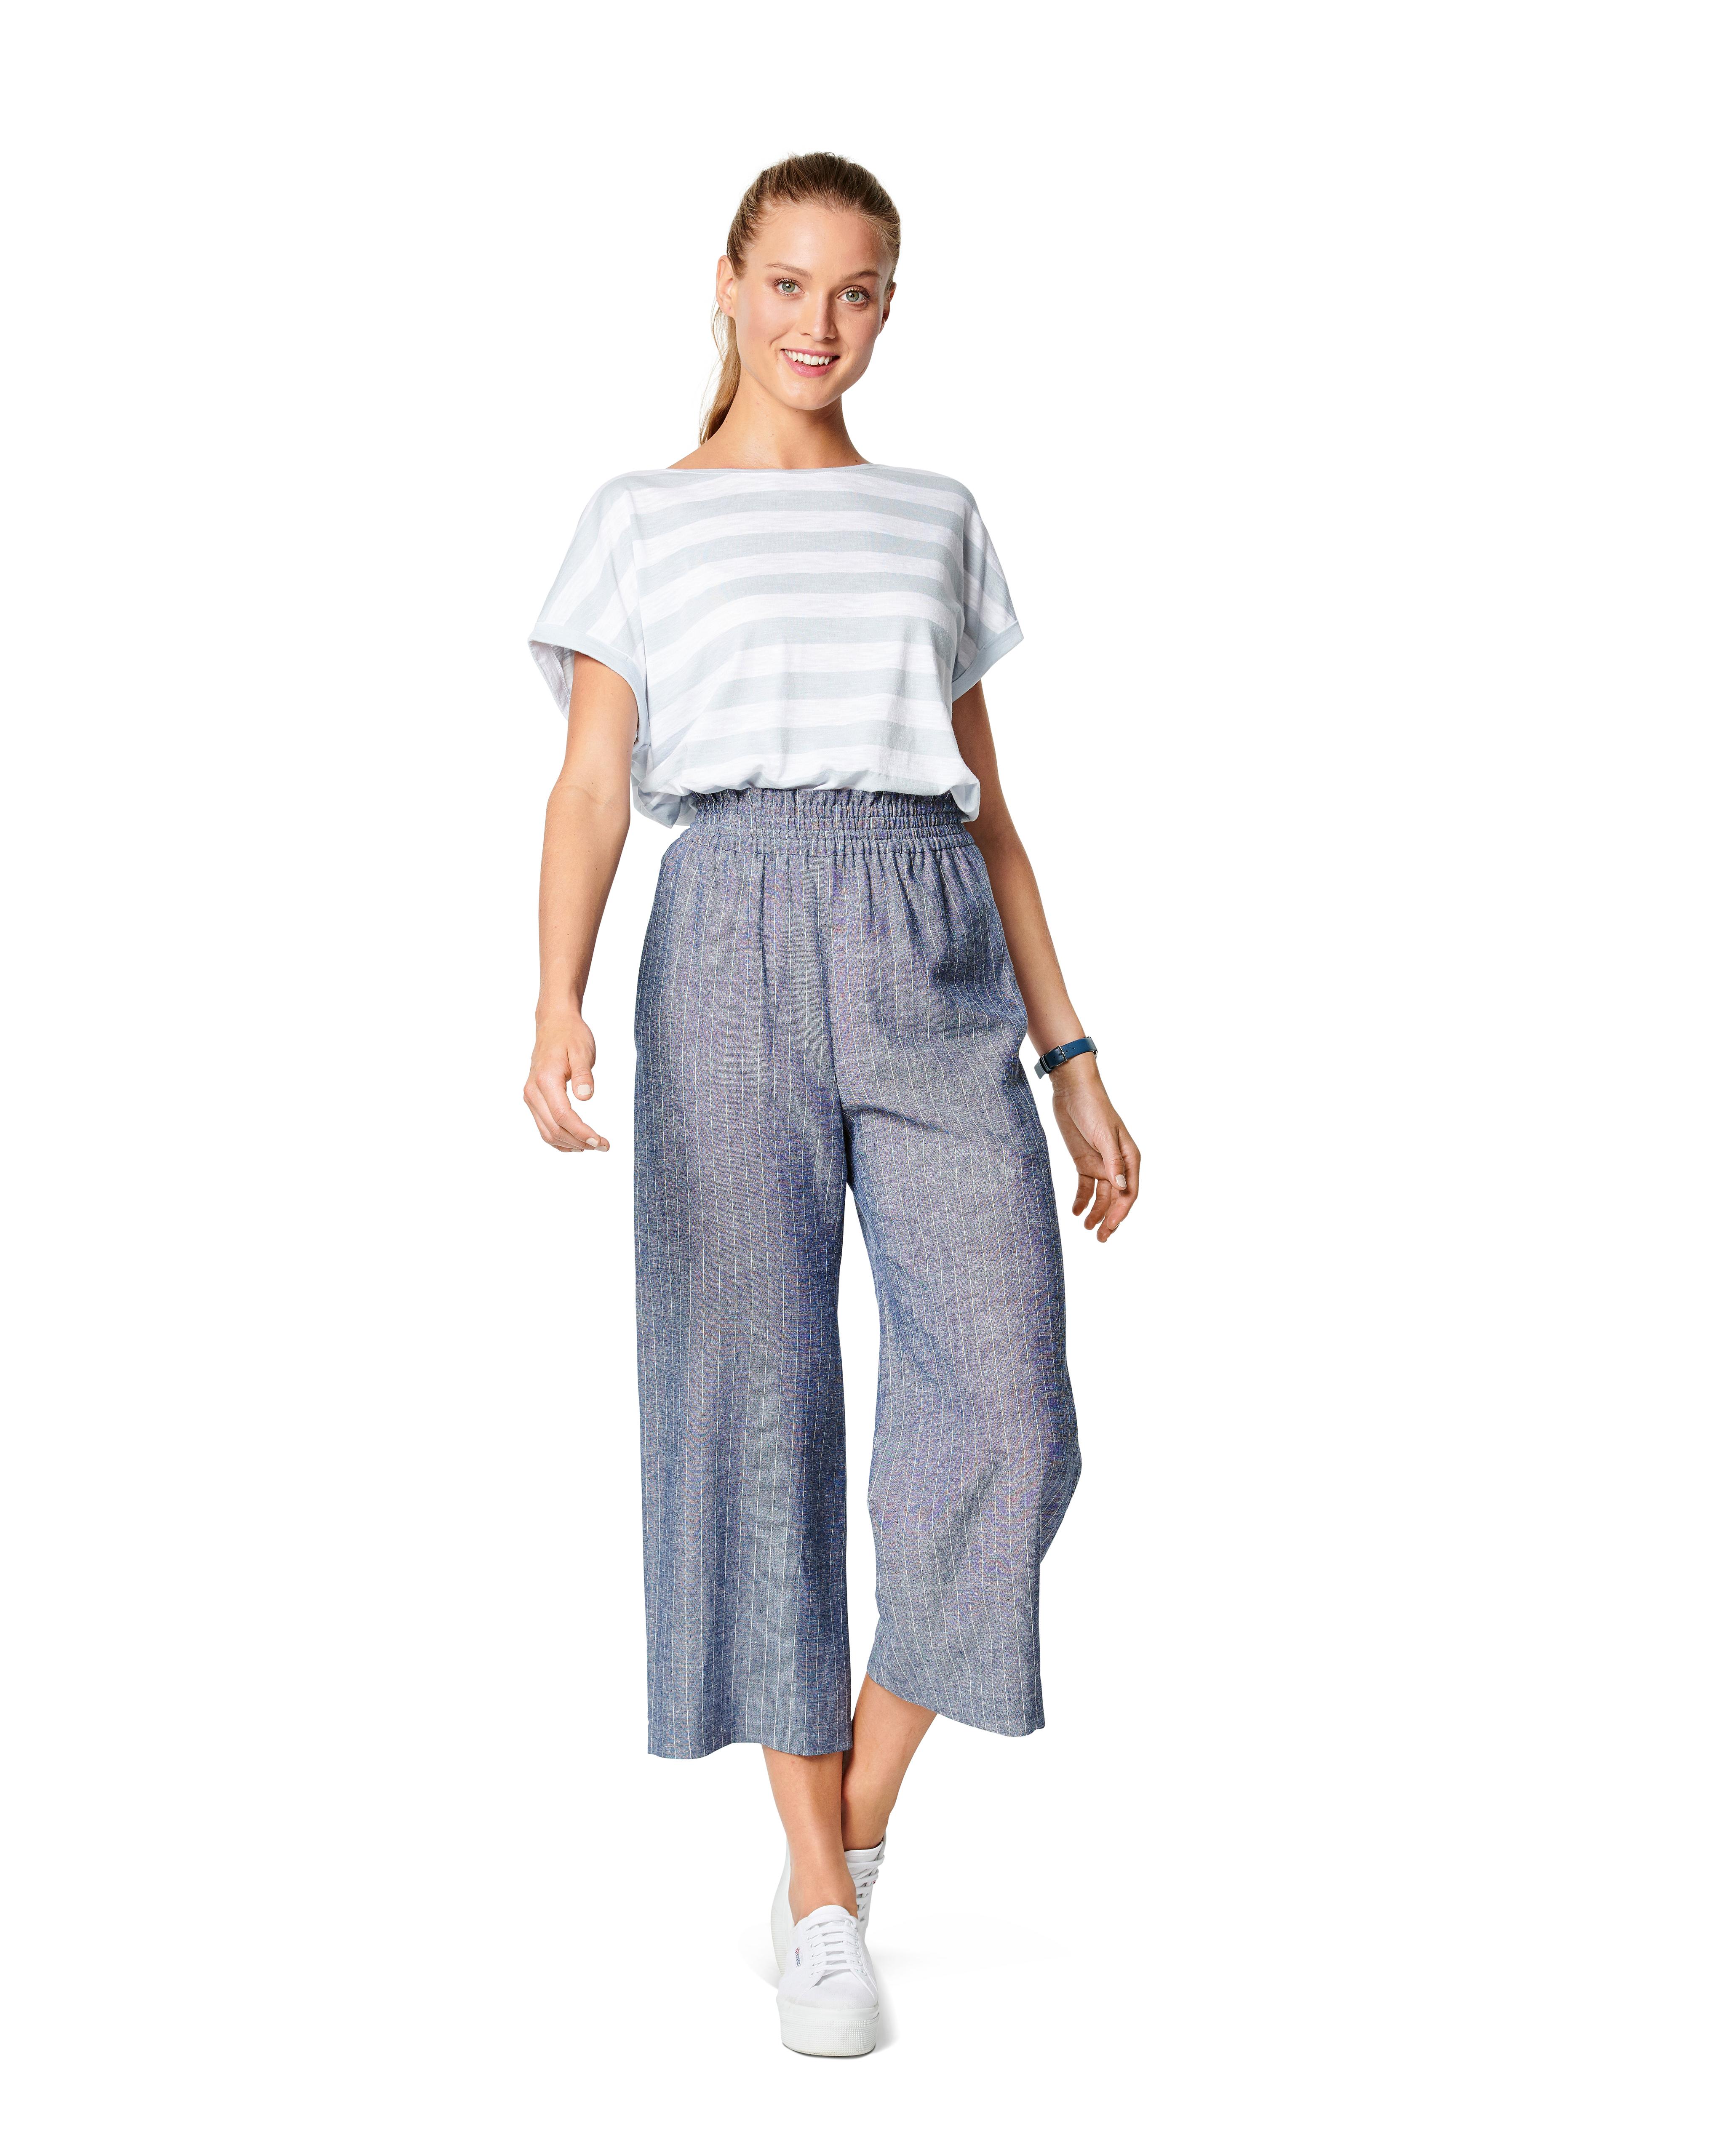 Burda B6229 Trousers/Pants with Elastic Waist with Pockets in Seams Sewing Pattern